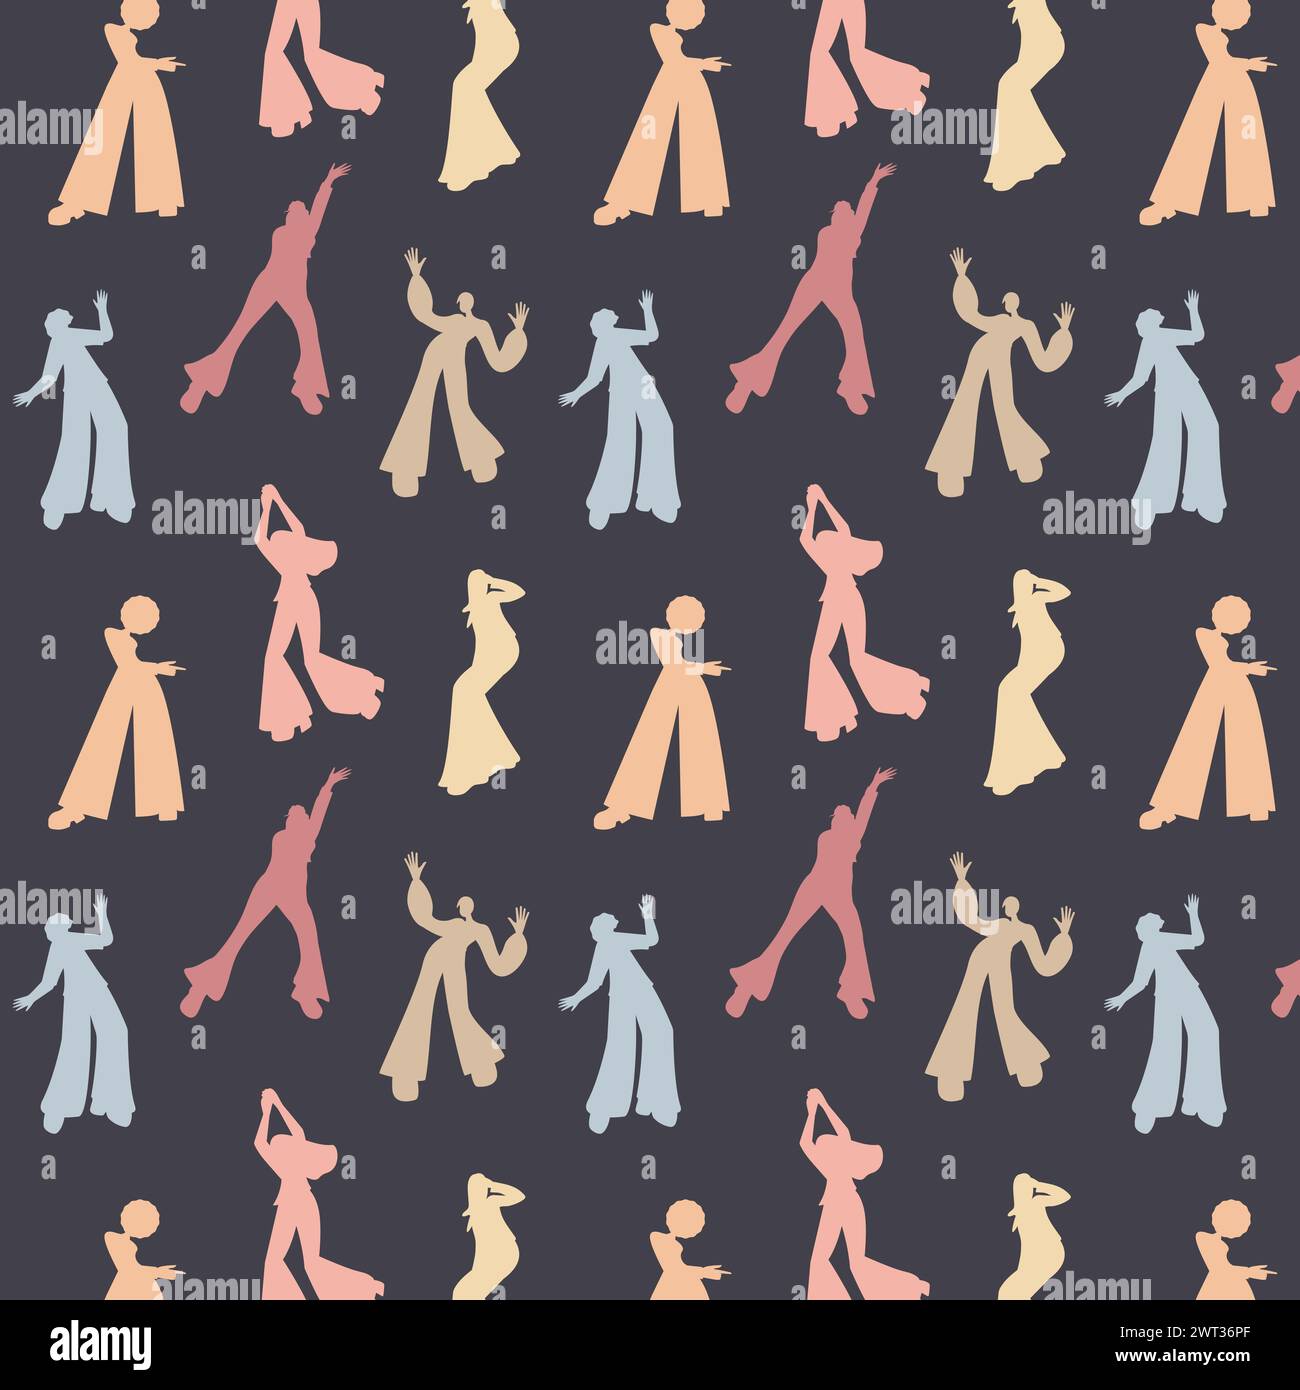 Seamless pattern Dancing 70s style Silhouettes of different dancing poses Vector illustration Isolated on black background Stock Vector